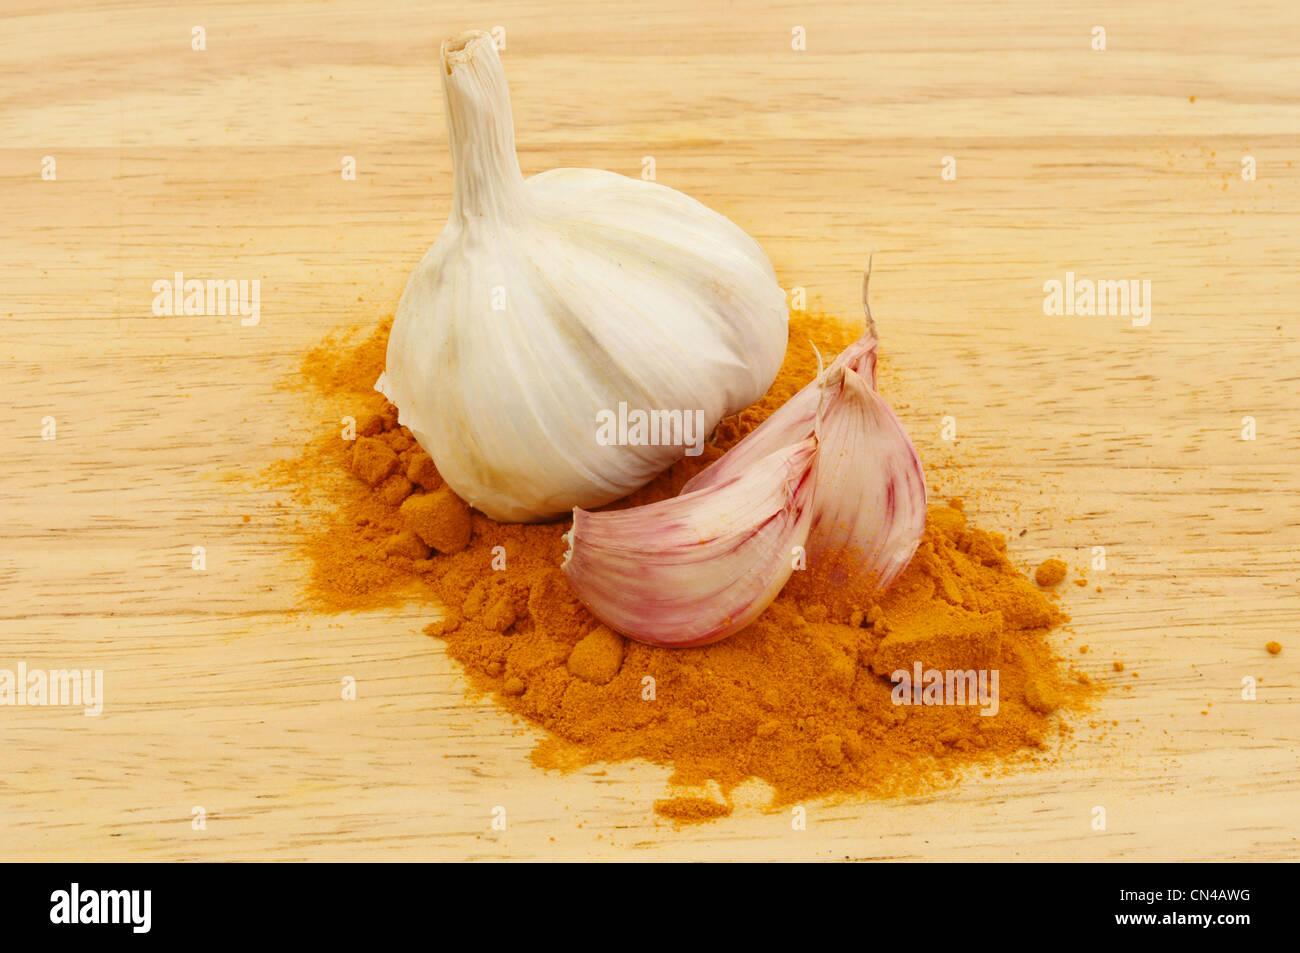 Garlic and tumeric spice on a wooden board Stock Photo